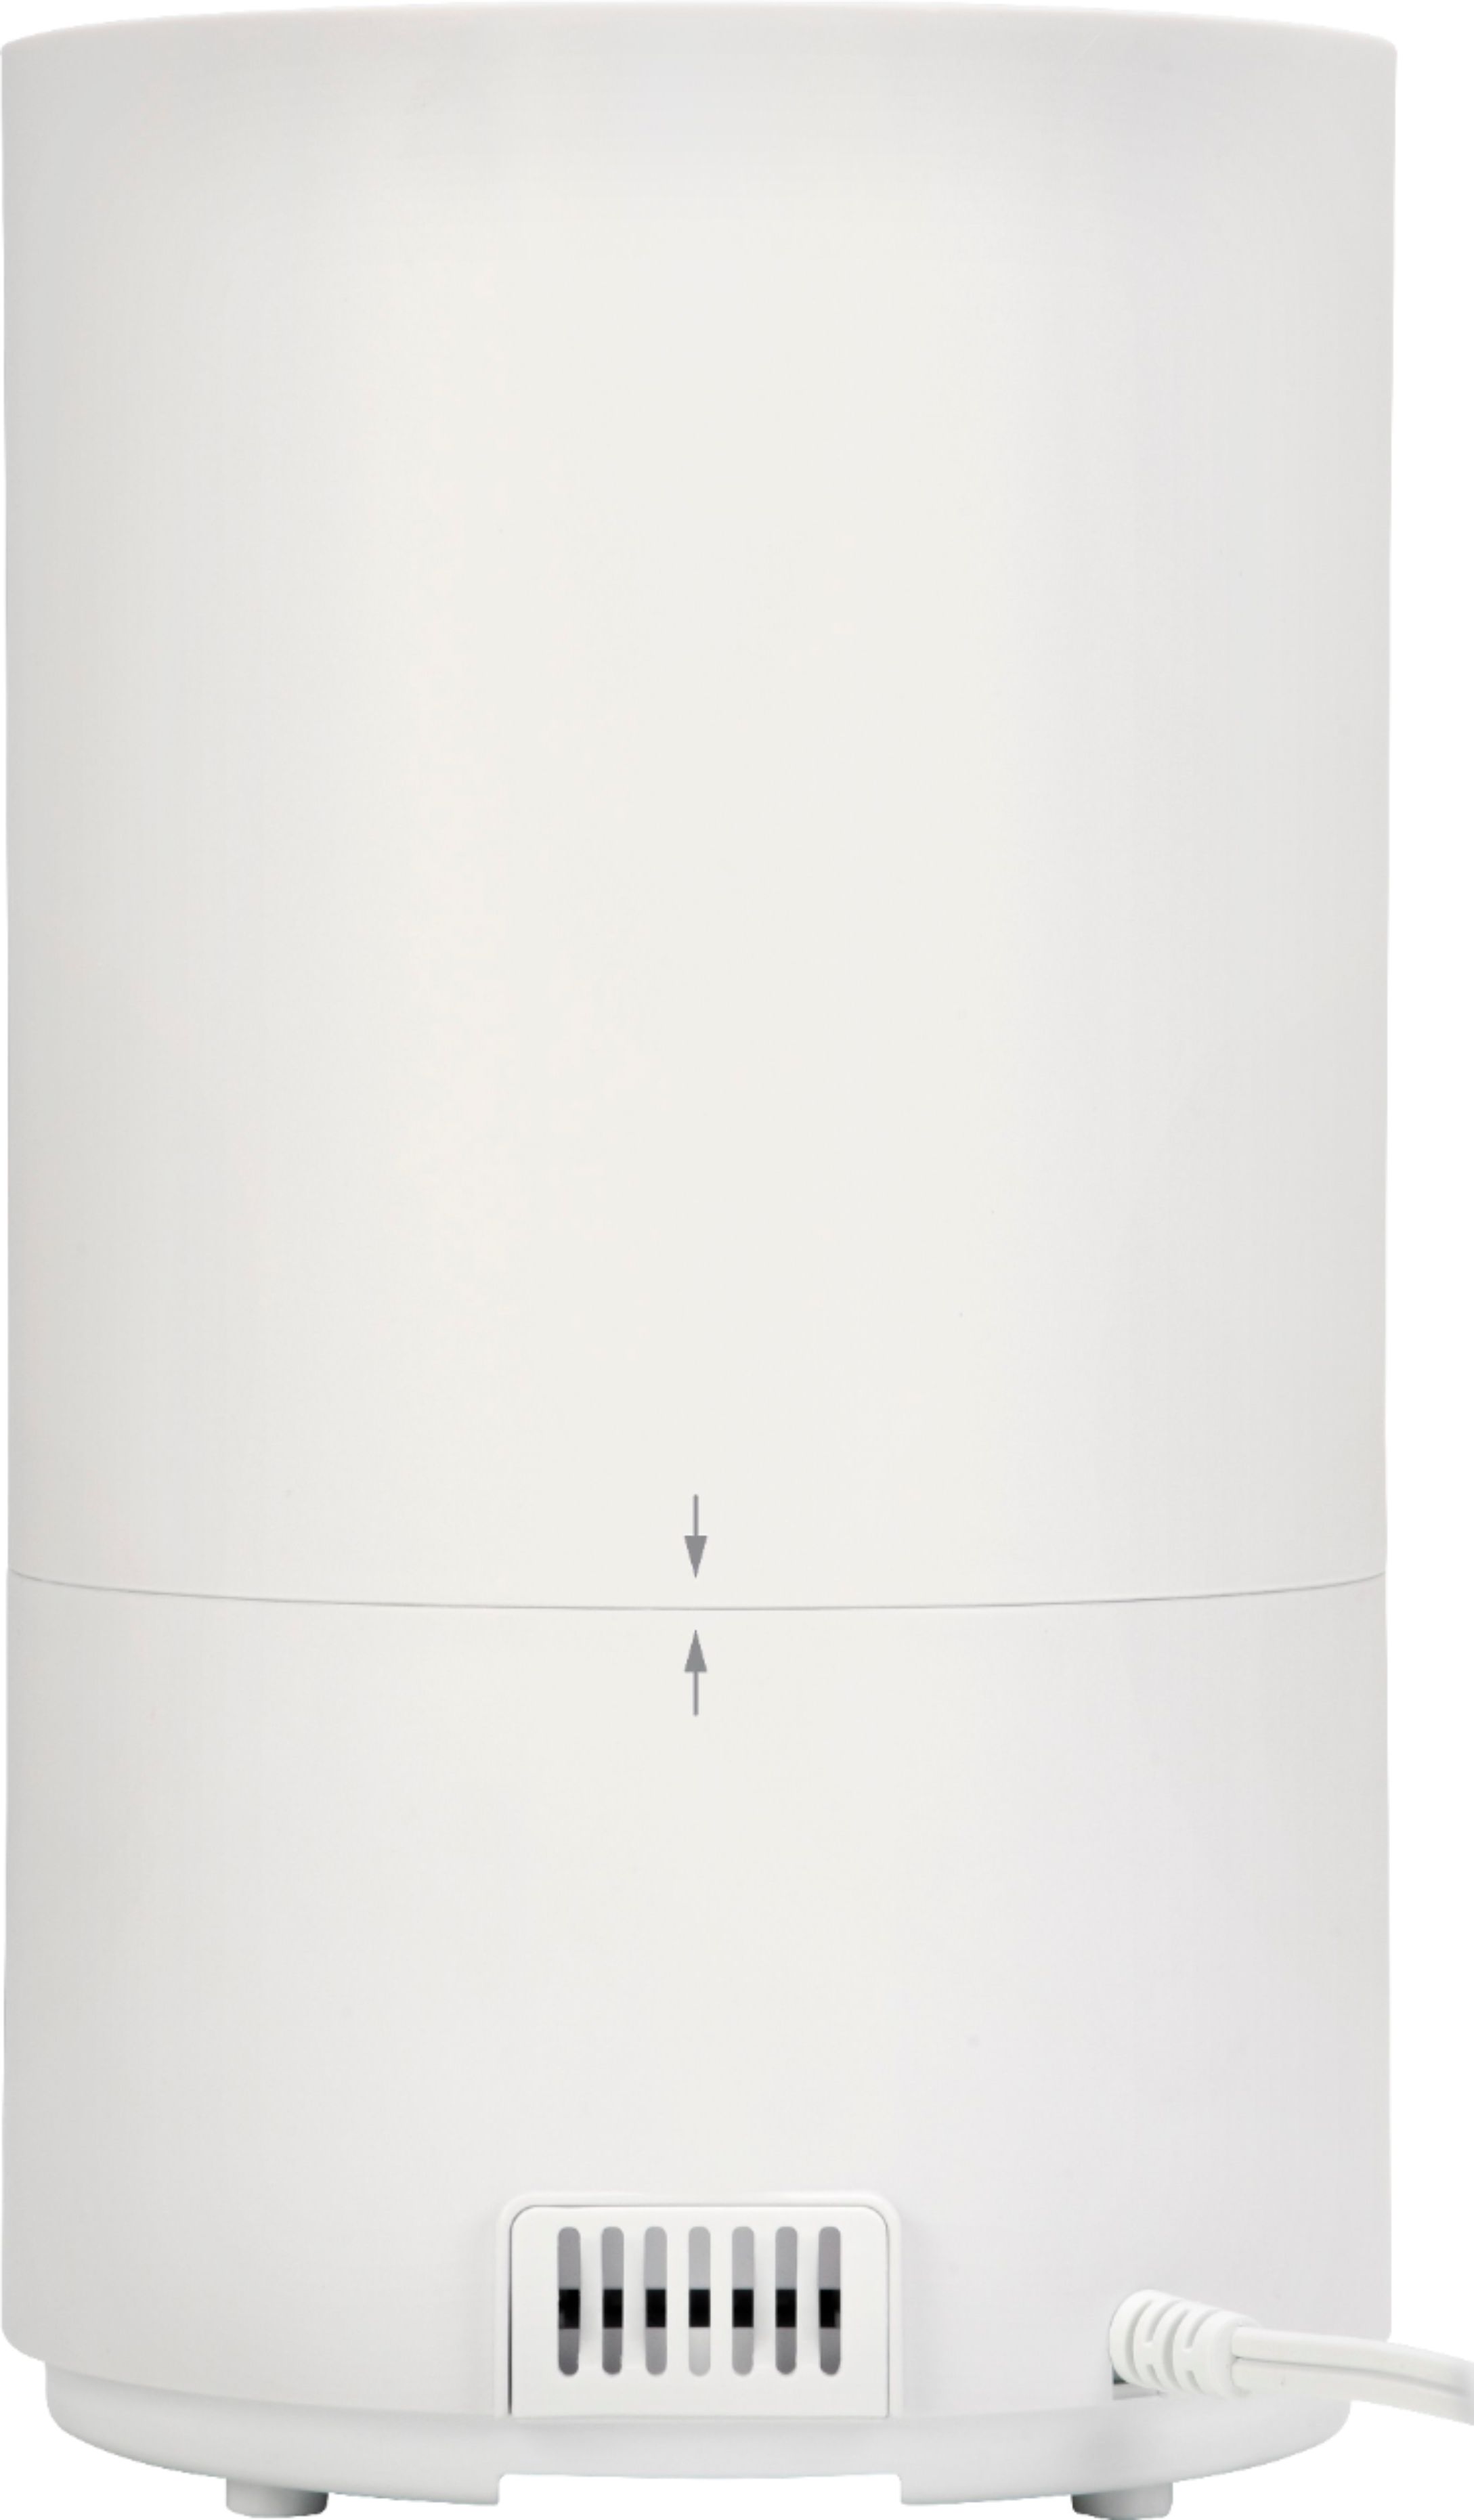 Back View: GermGuardian - 167 Sq Ft 4-in-1 True HEPA Air Purifier - White